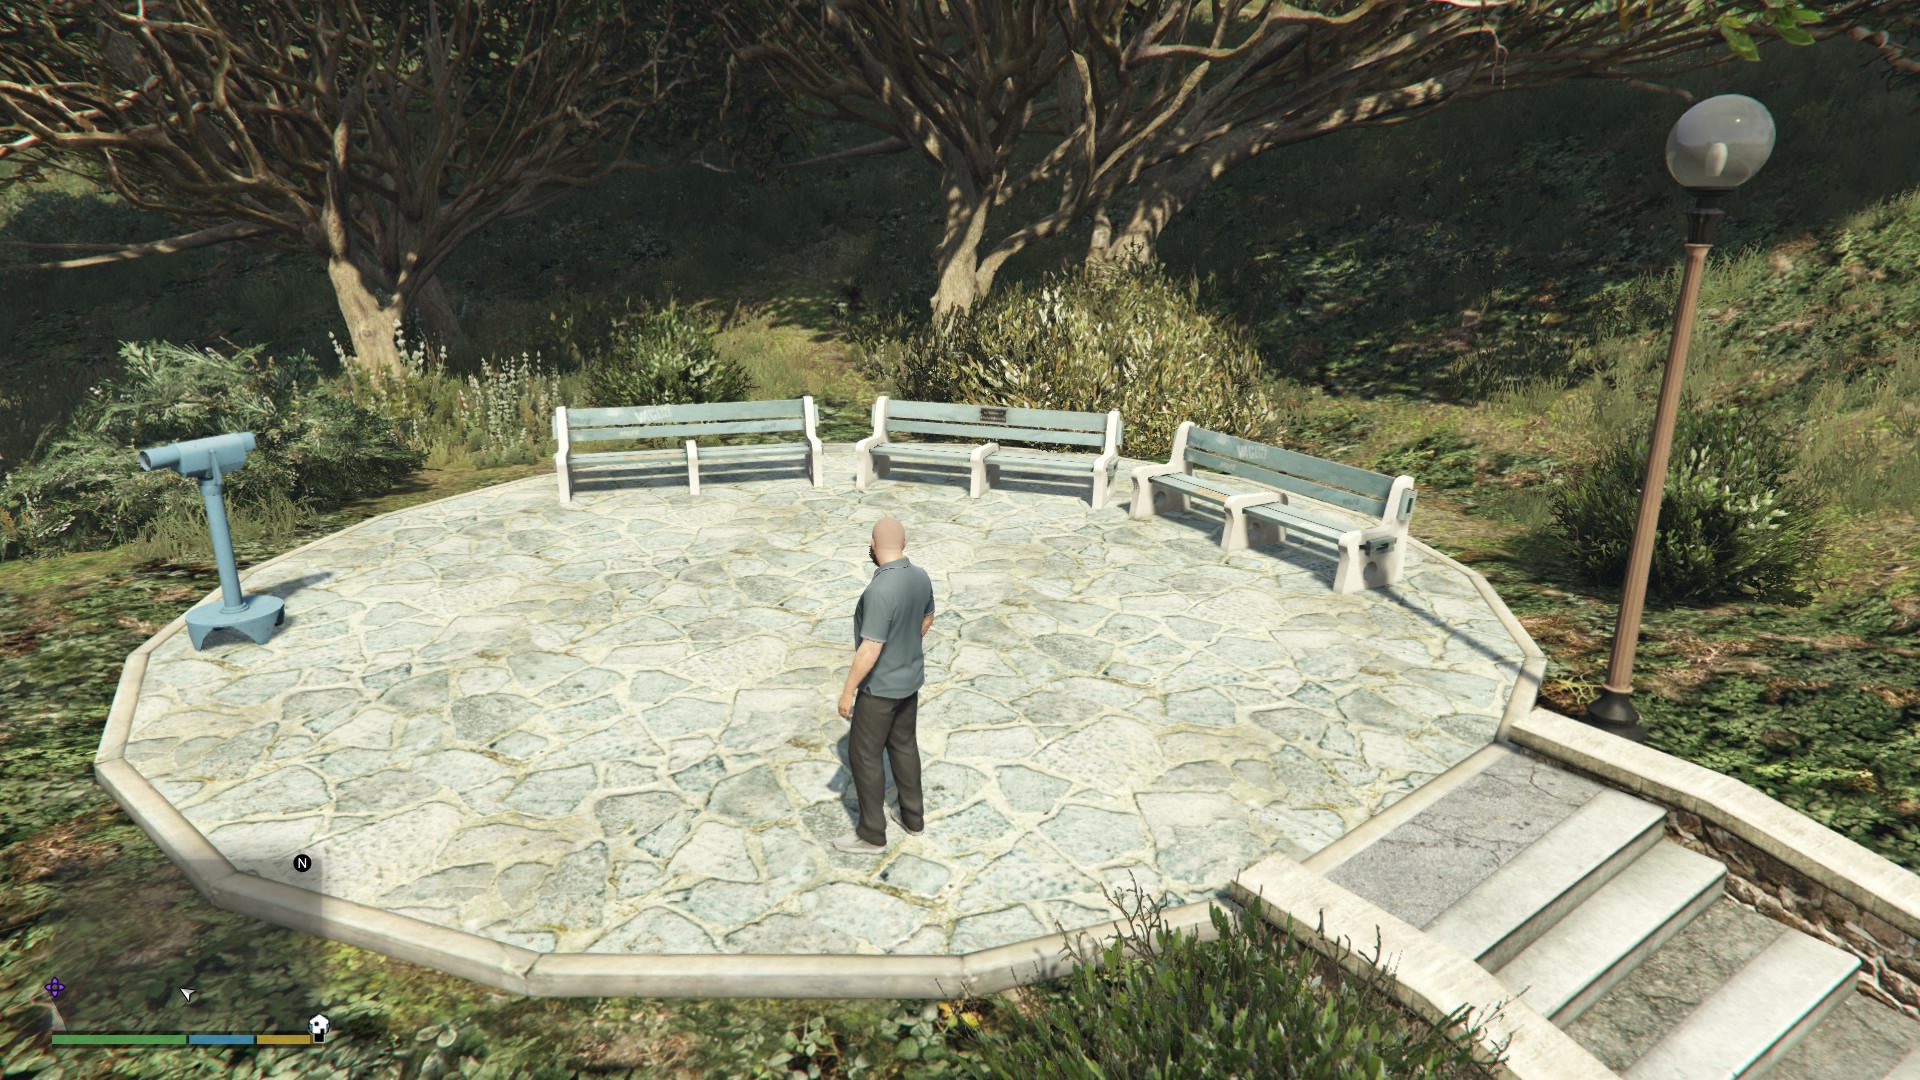 GTA Players Search For Secret Jetpack, Find Touching Memorial Instead